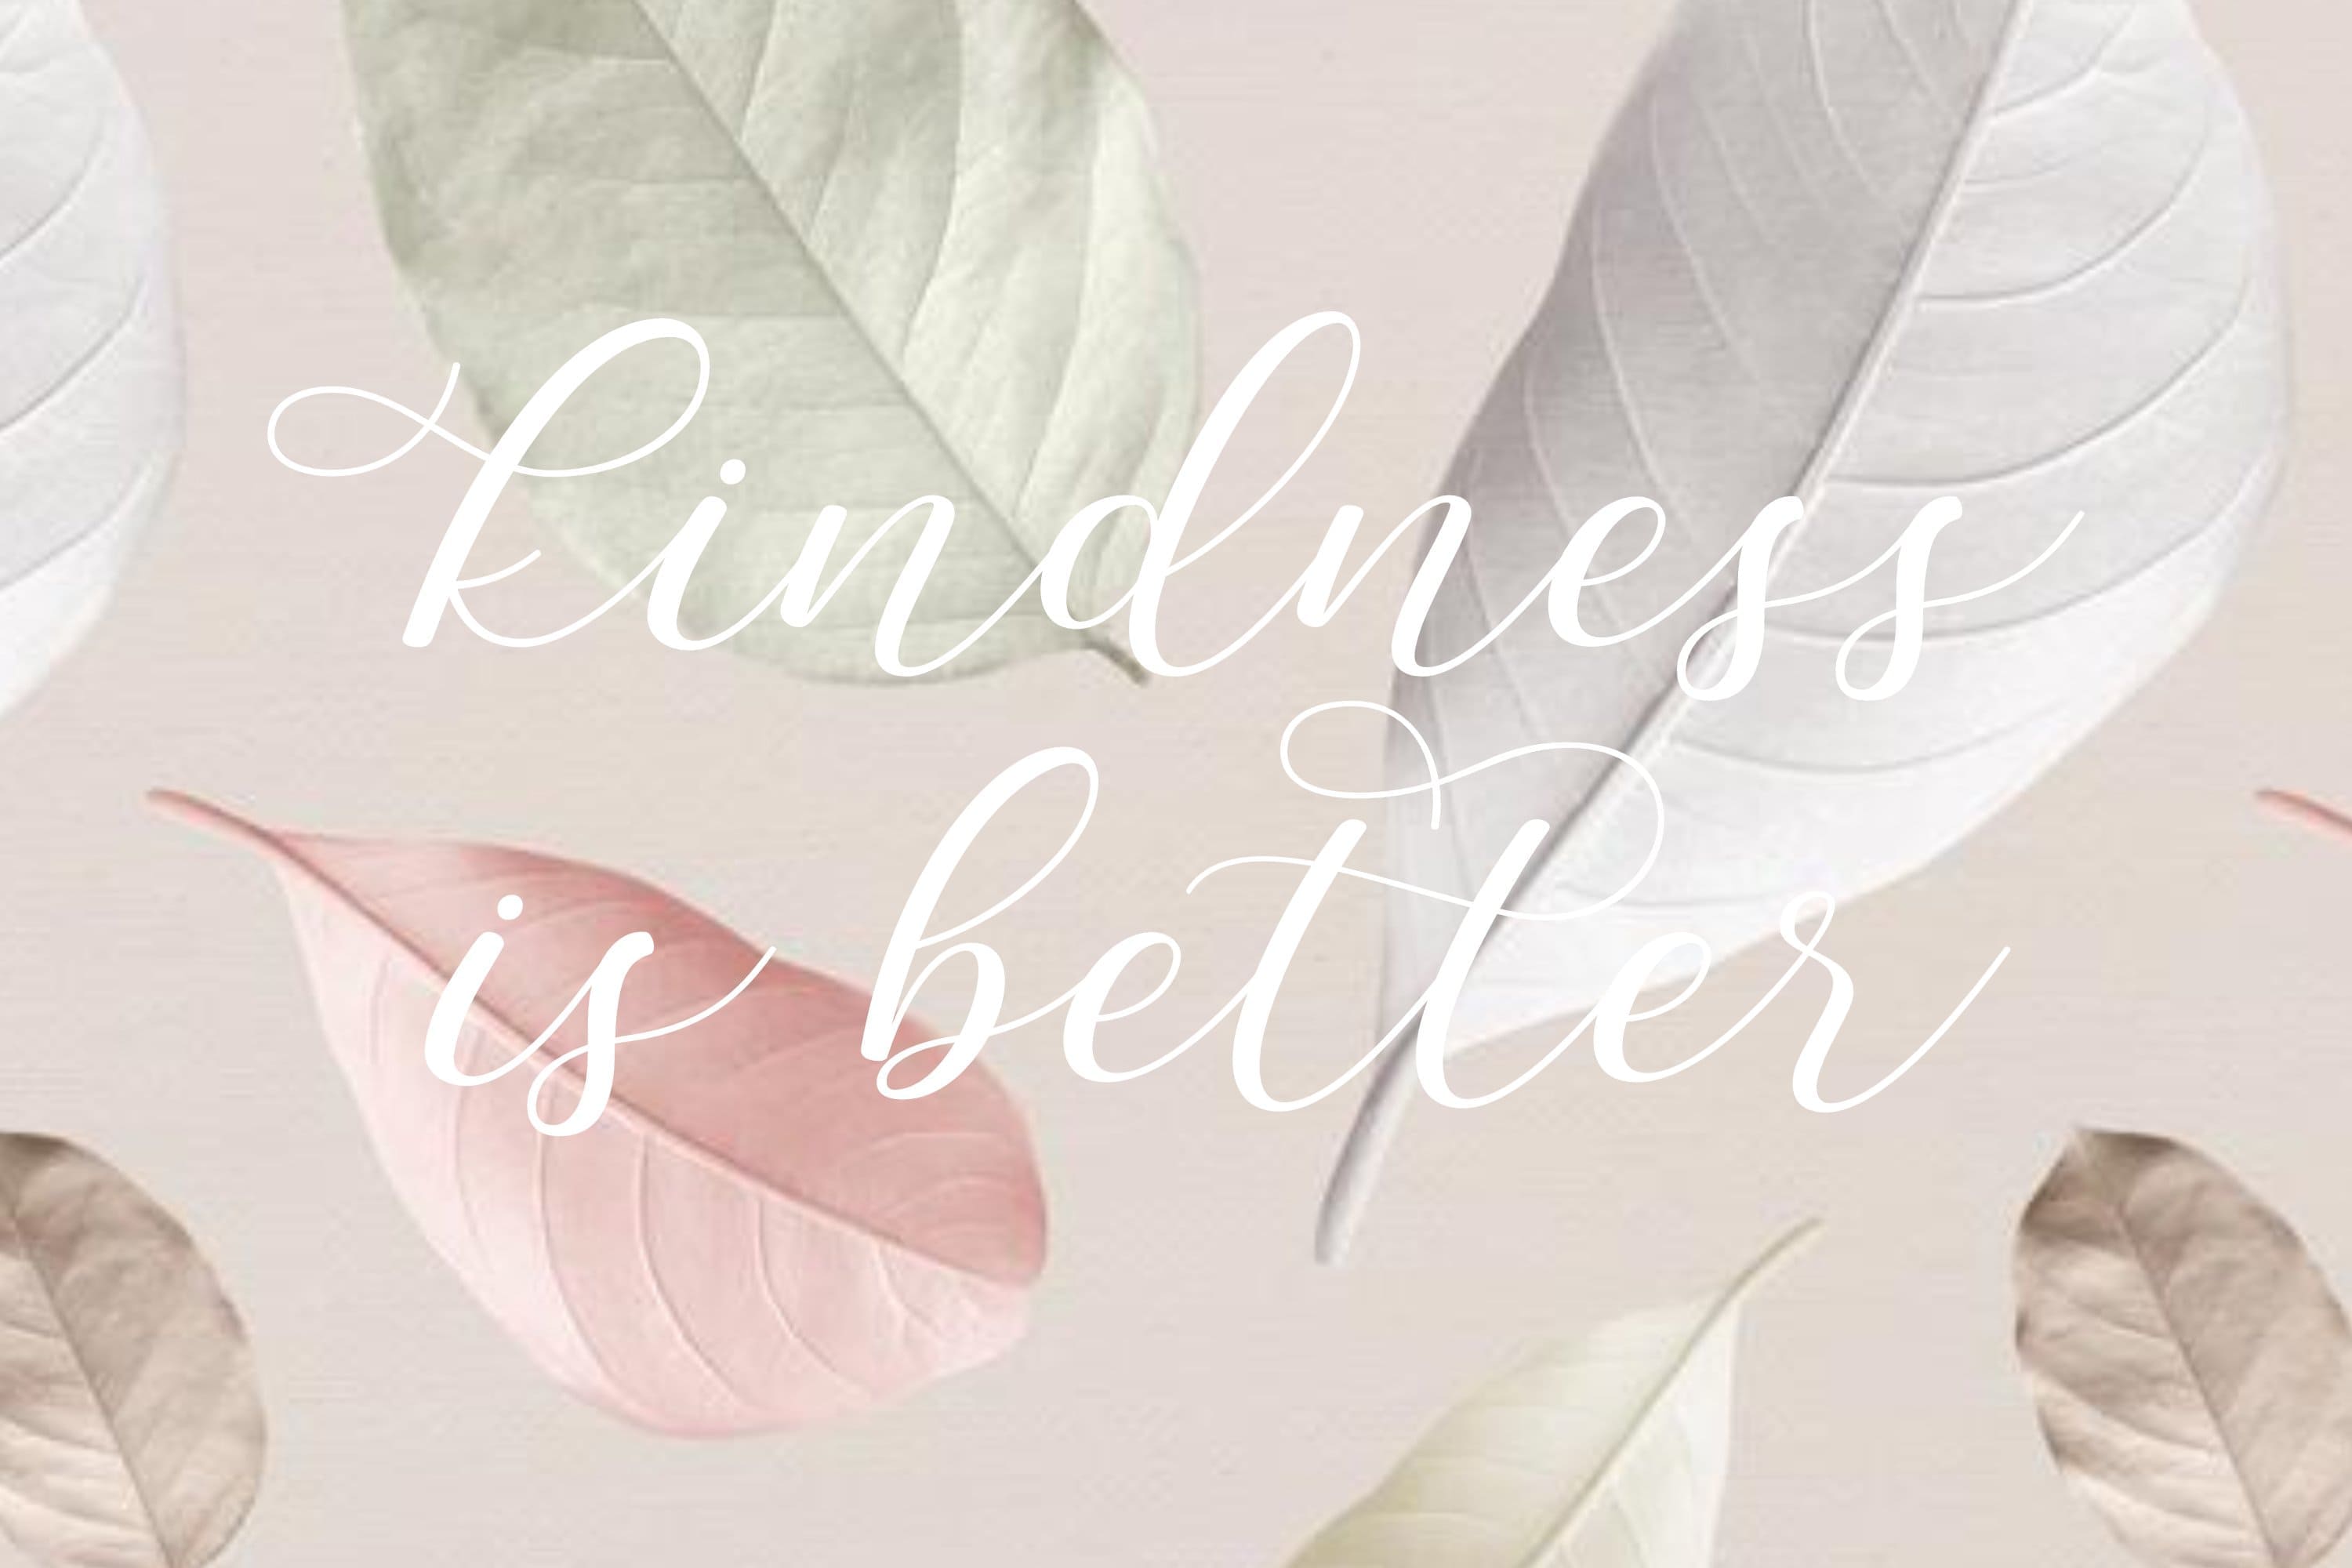 Multicolored leaves and the title "Kindness is better".